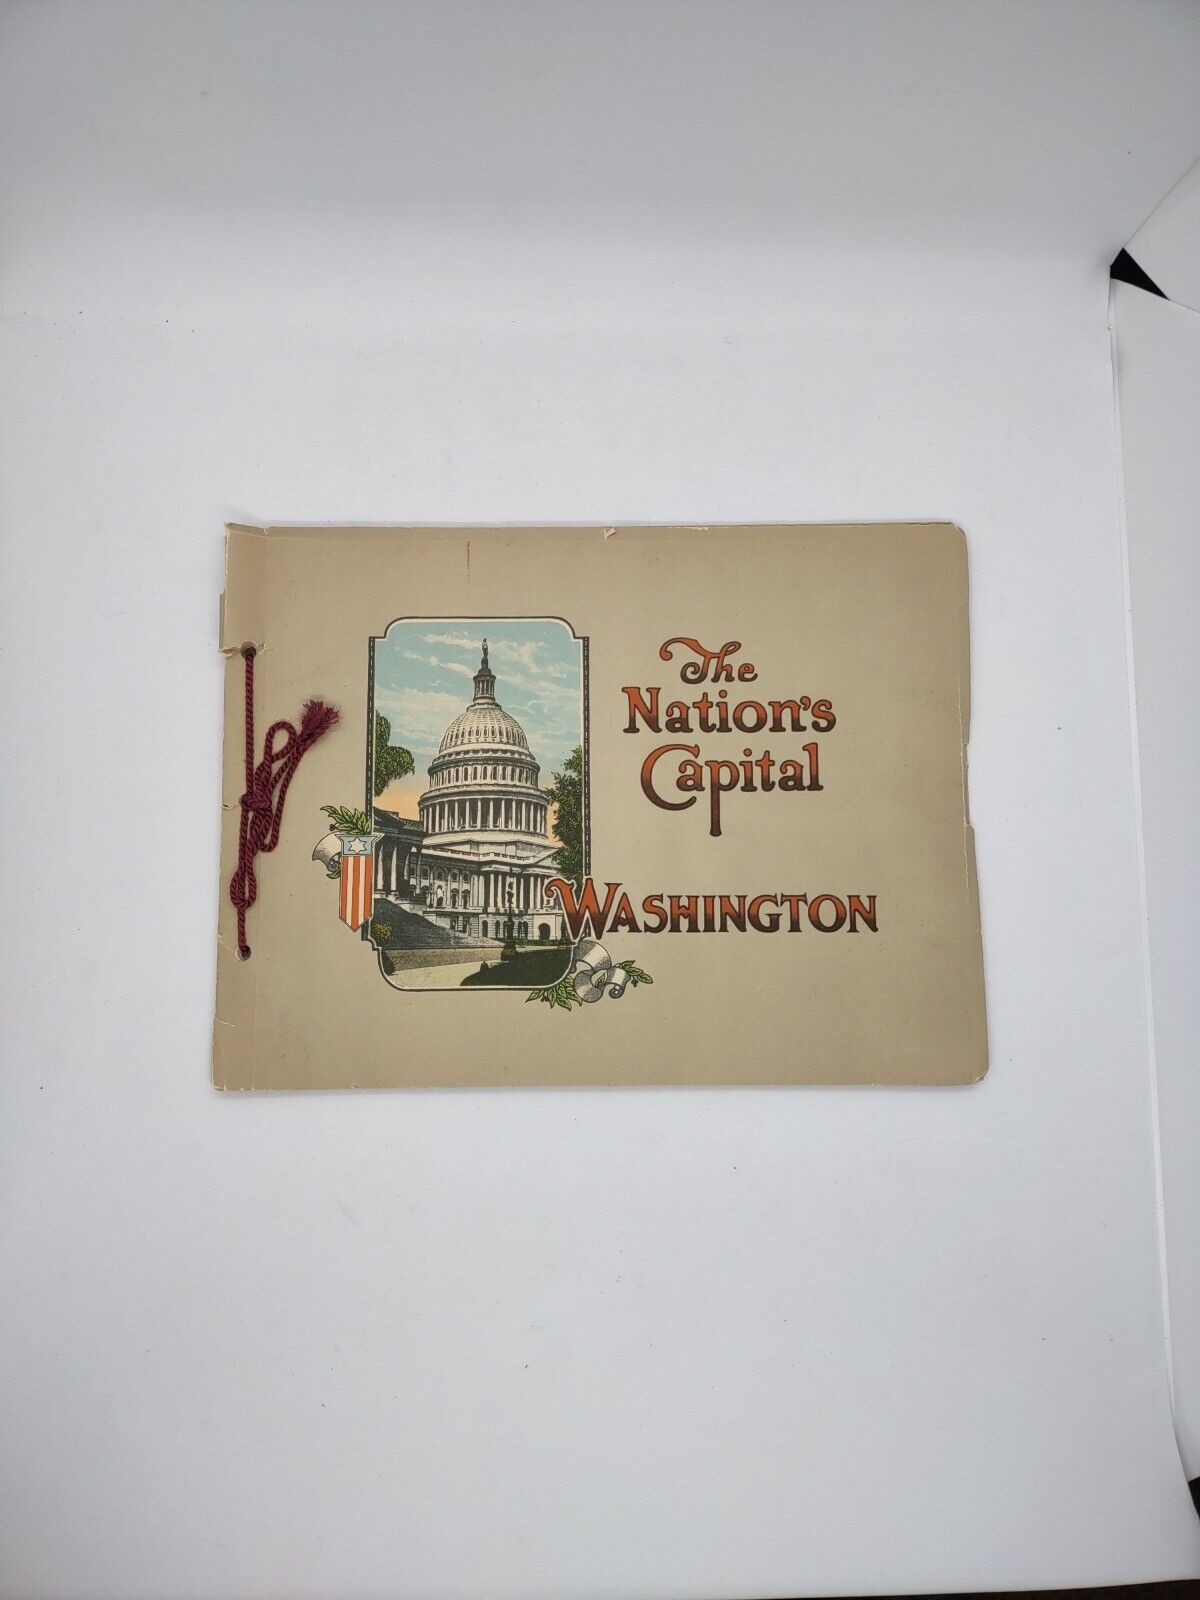 VTG Early 1900's WASHINGTON THE NATIONS CAPITAL BOOKLET (AC)